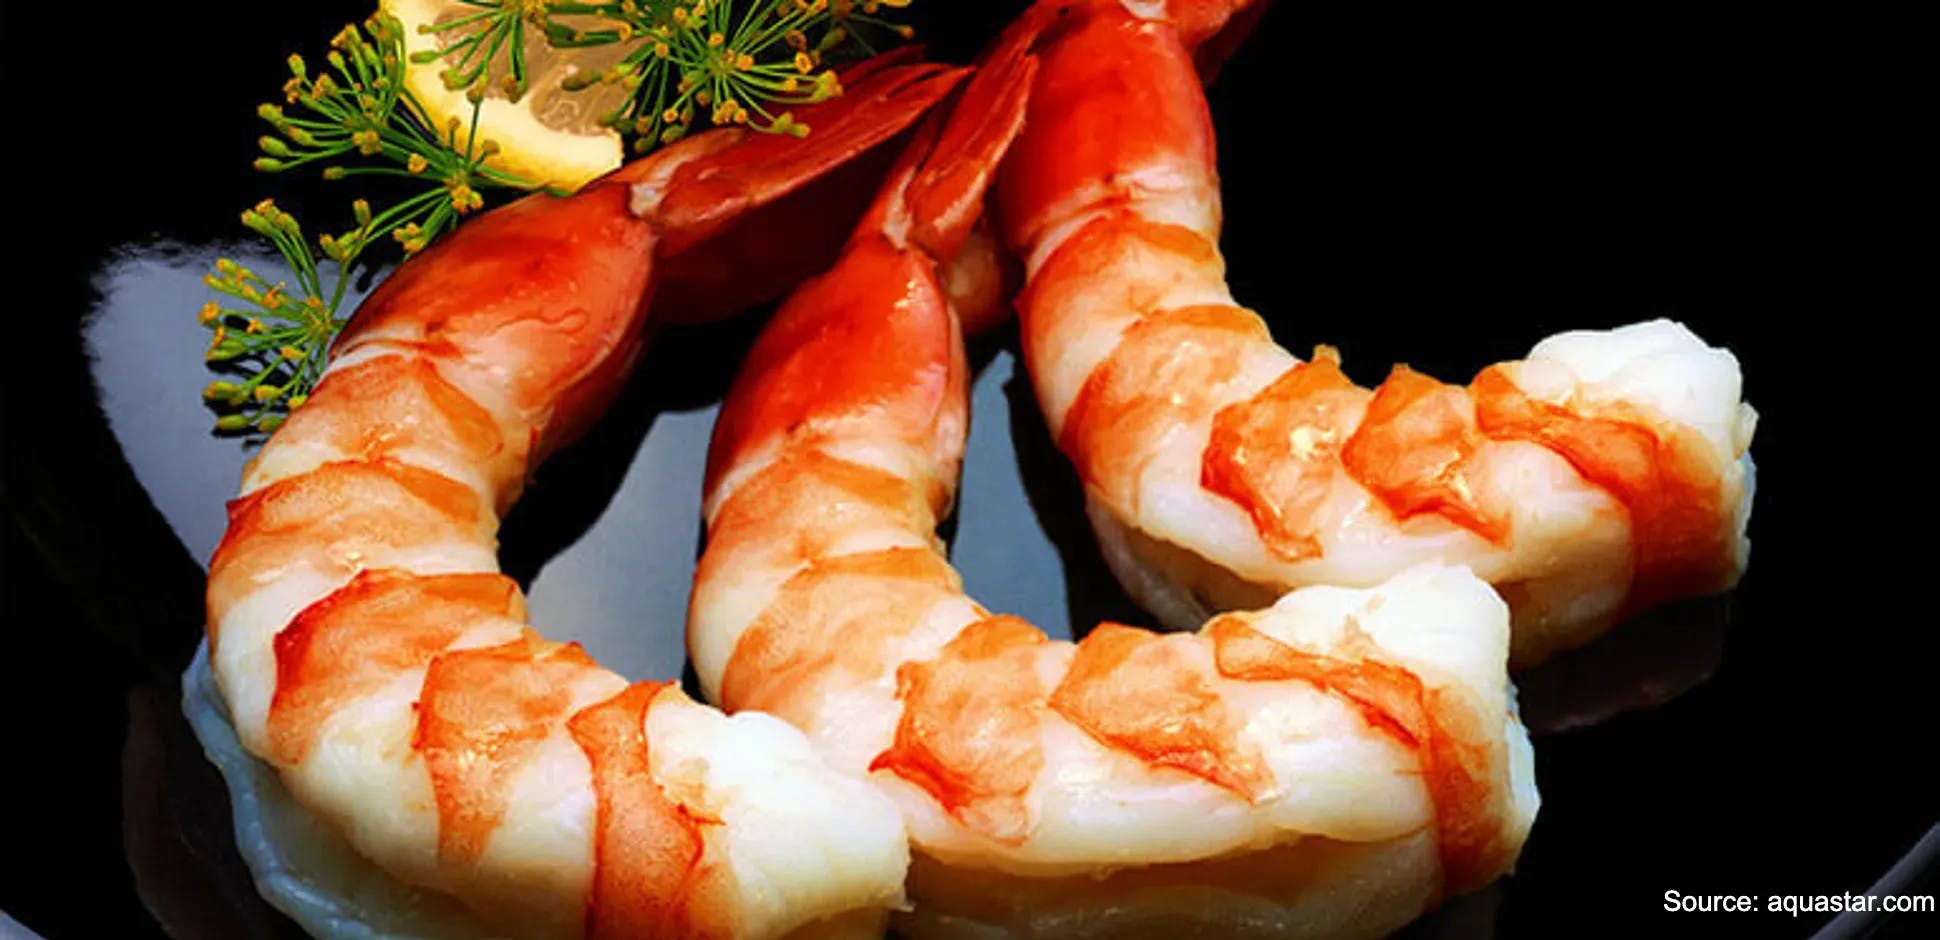 7 Benefits of Tiger Shrimp for Health: High Protein Content